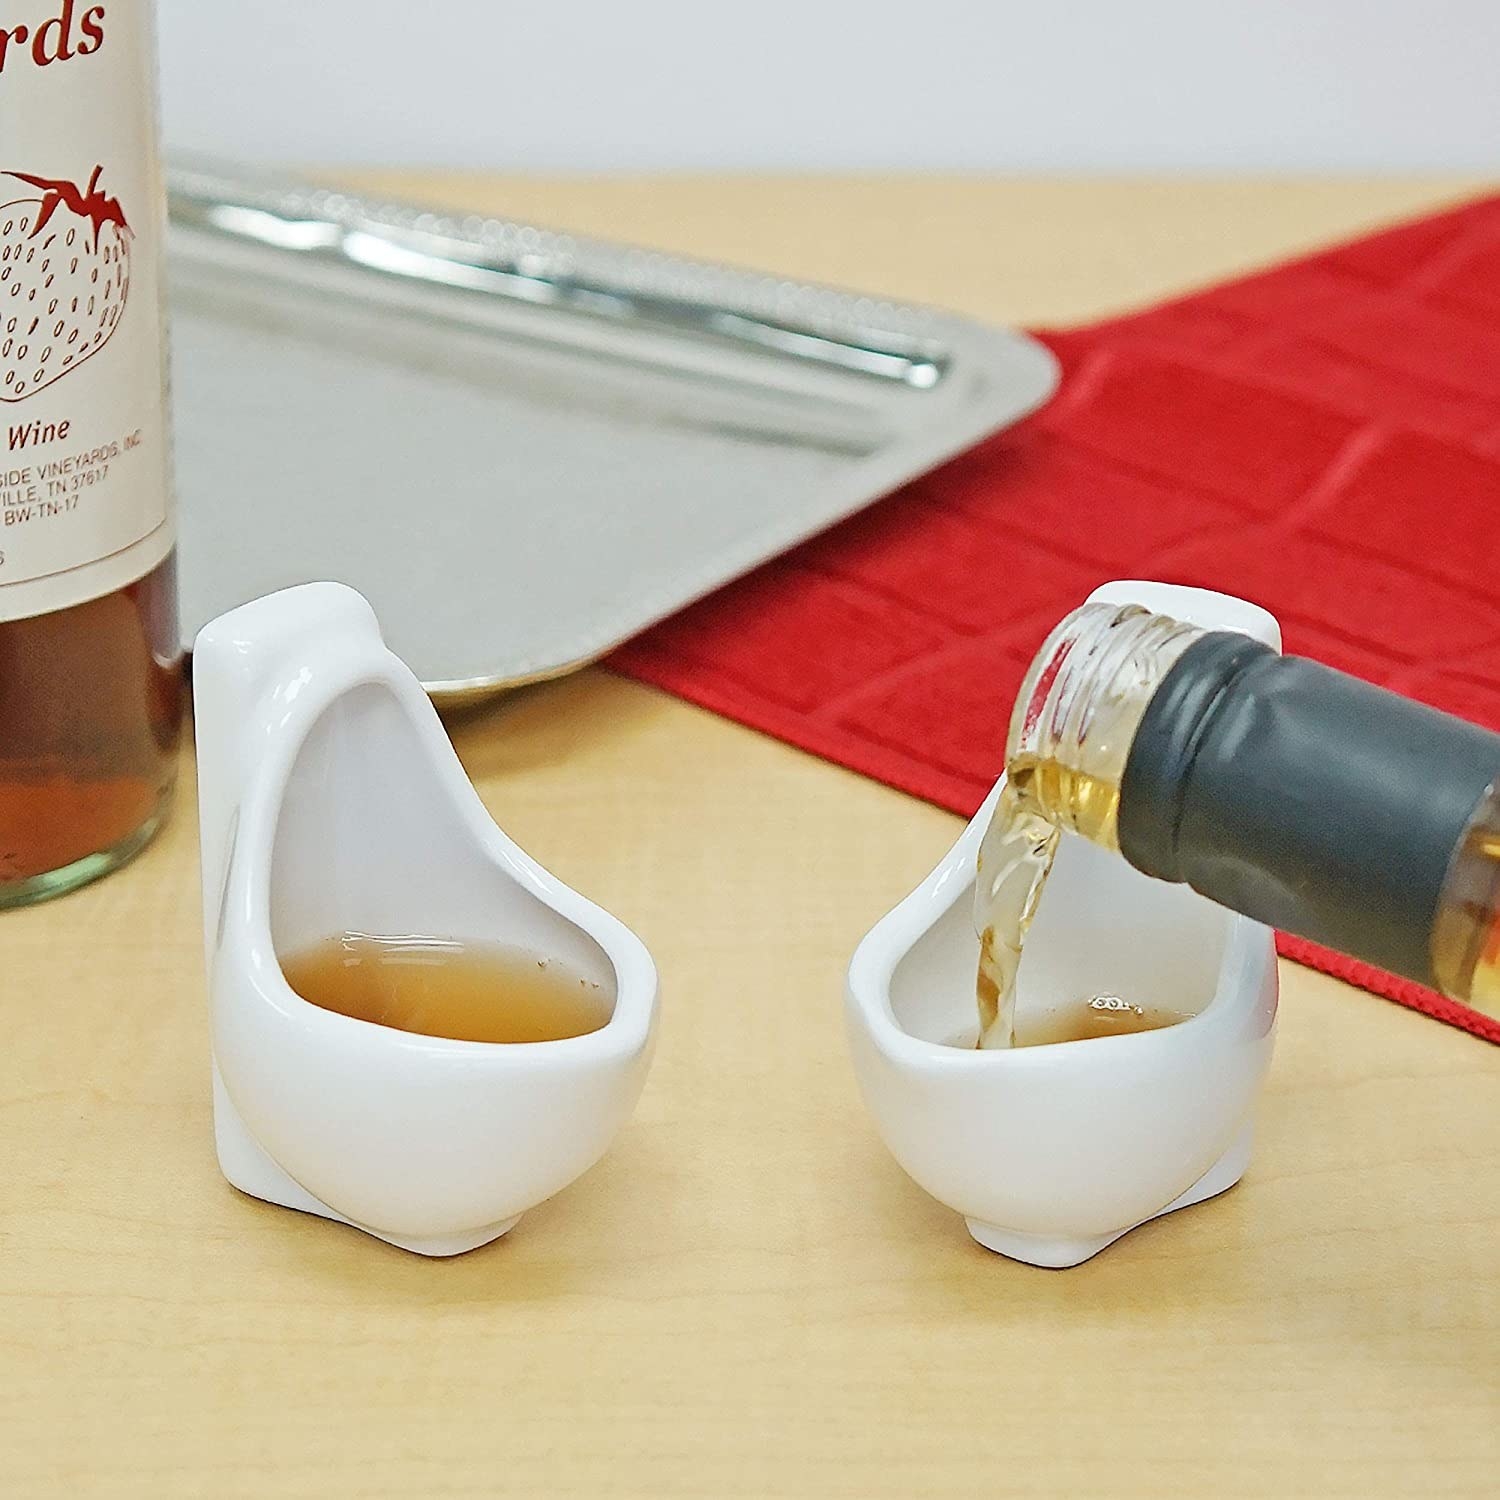 Shot glasses shaped like urinals with liquid in them that looks like urine